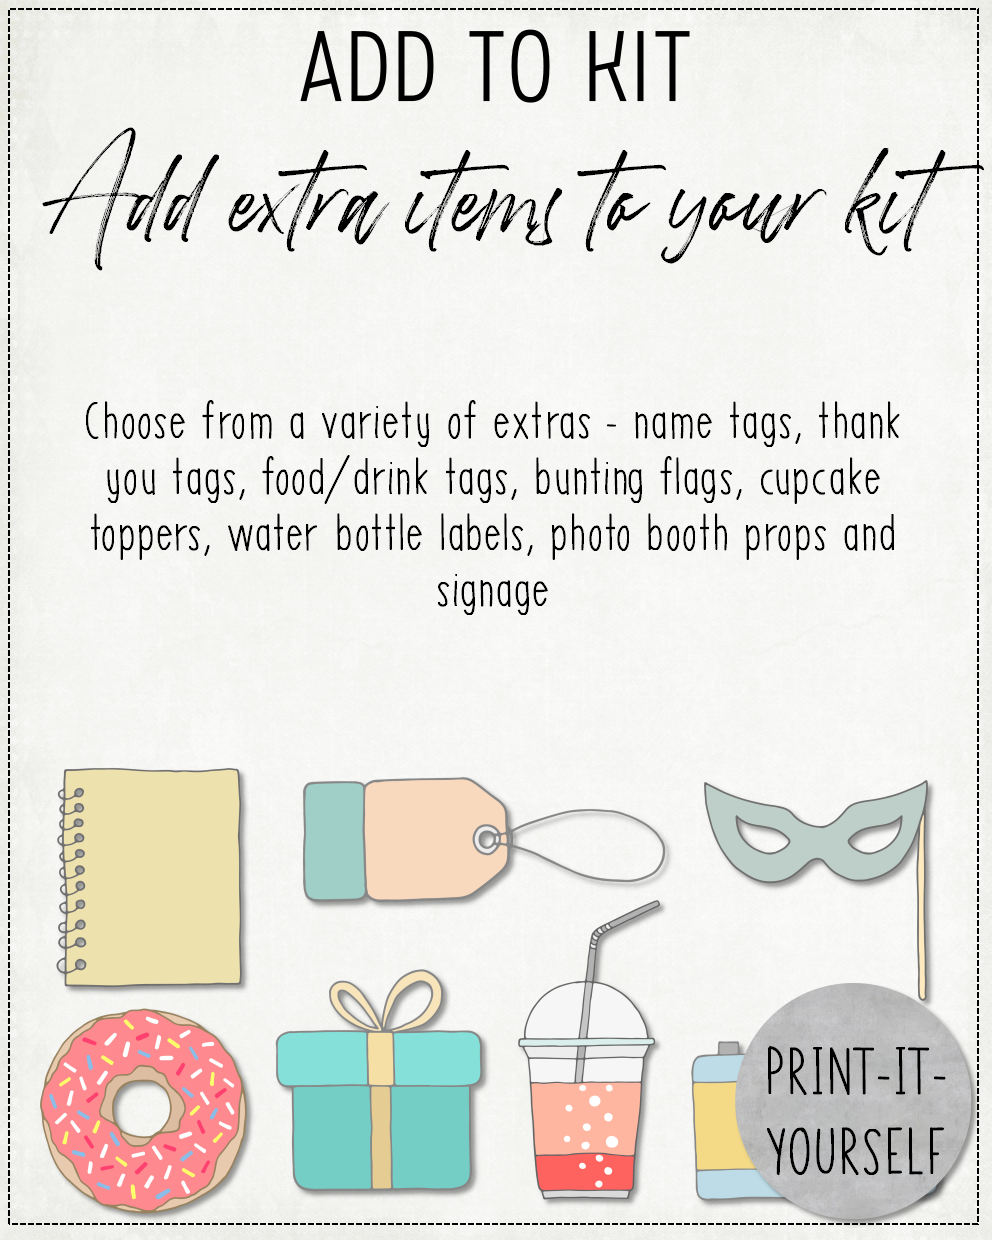 ADD TO KIT:  Add extra items to your kit